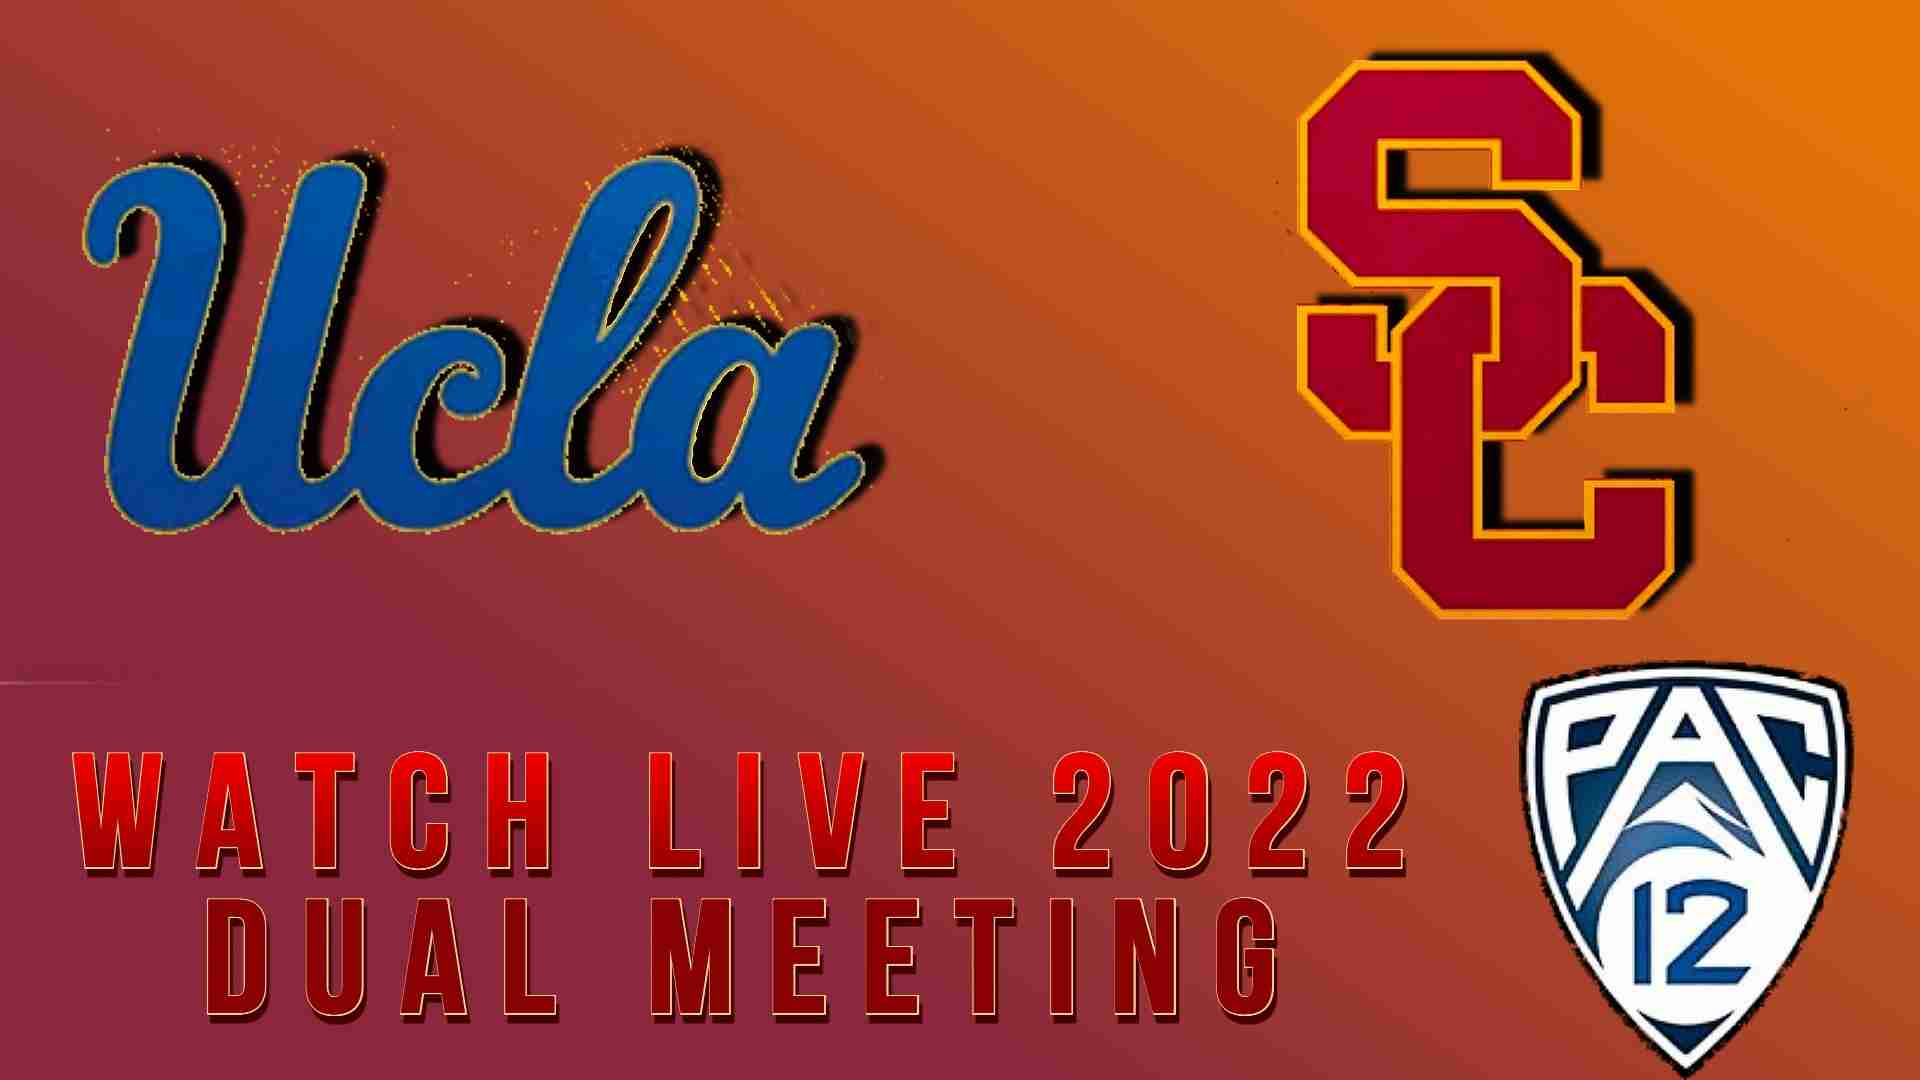 How to watch the USC vs UCLA 2022 Dual Meet? Order of events schedule